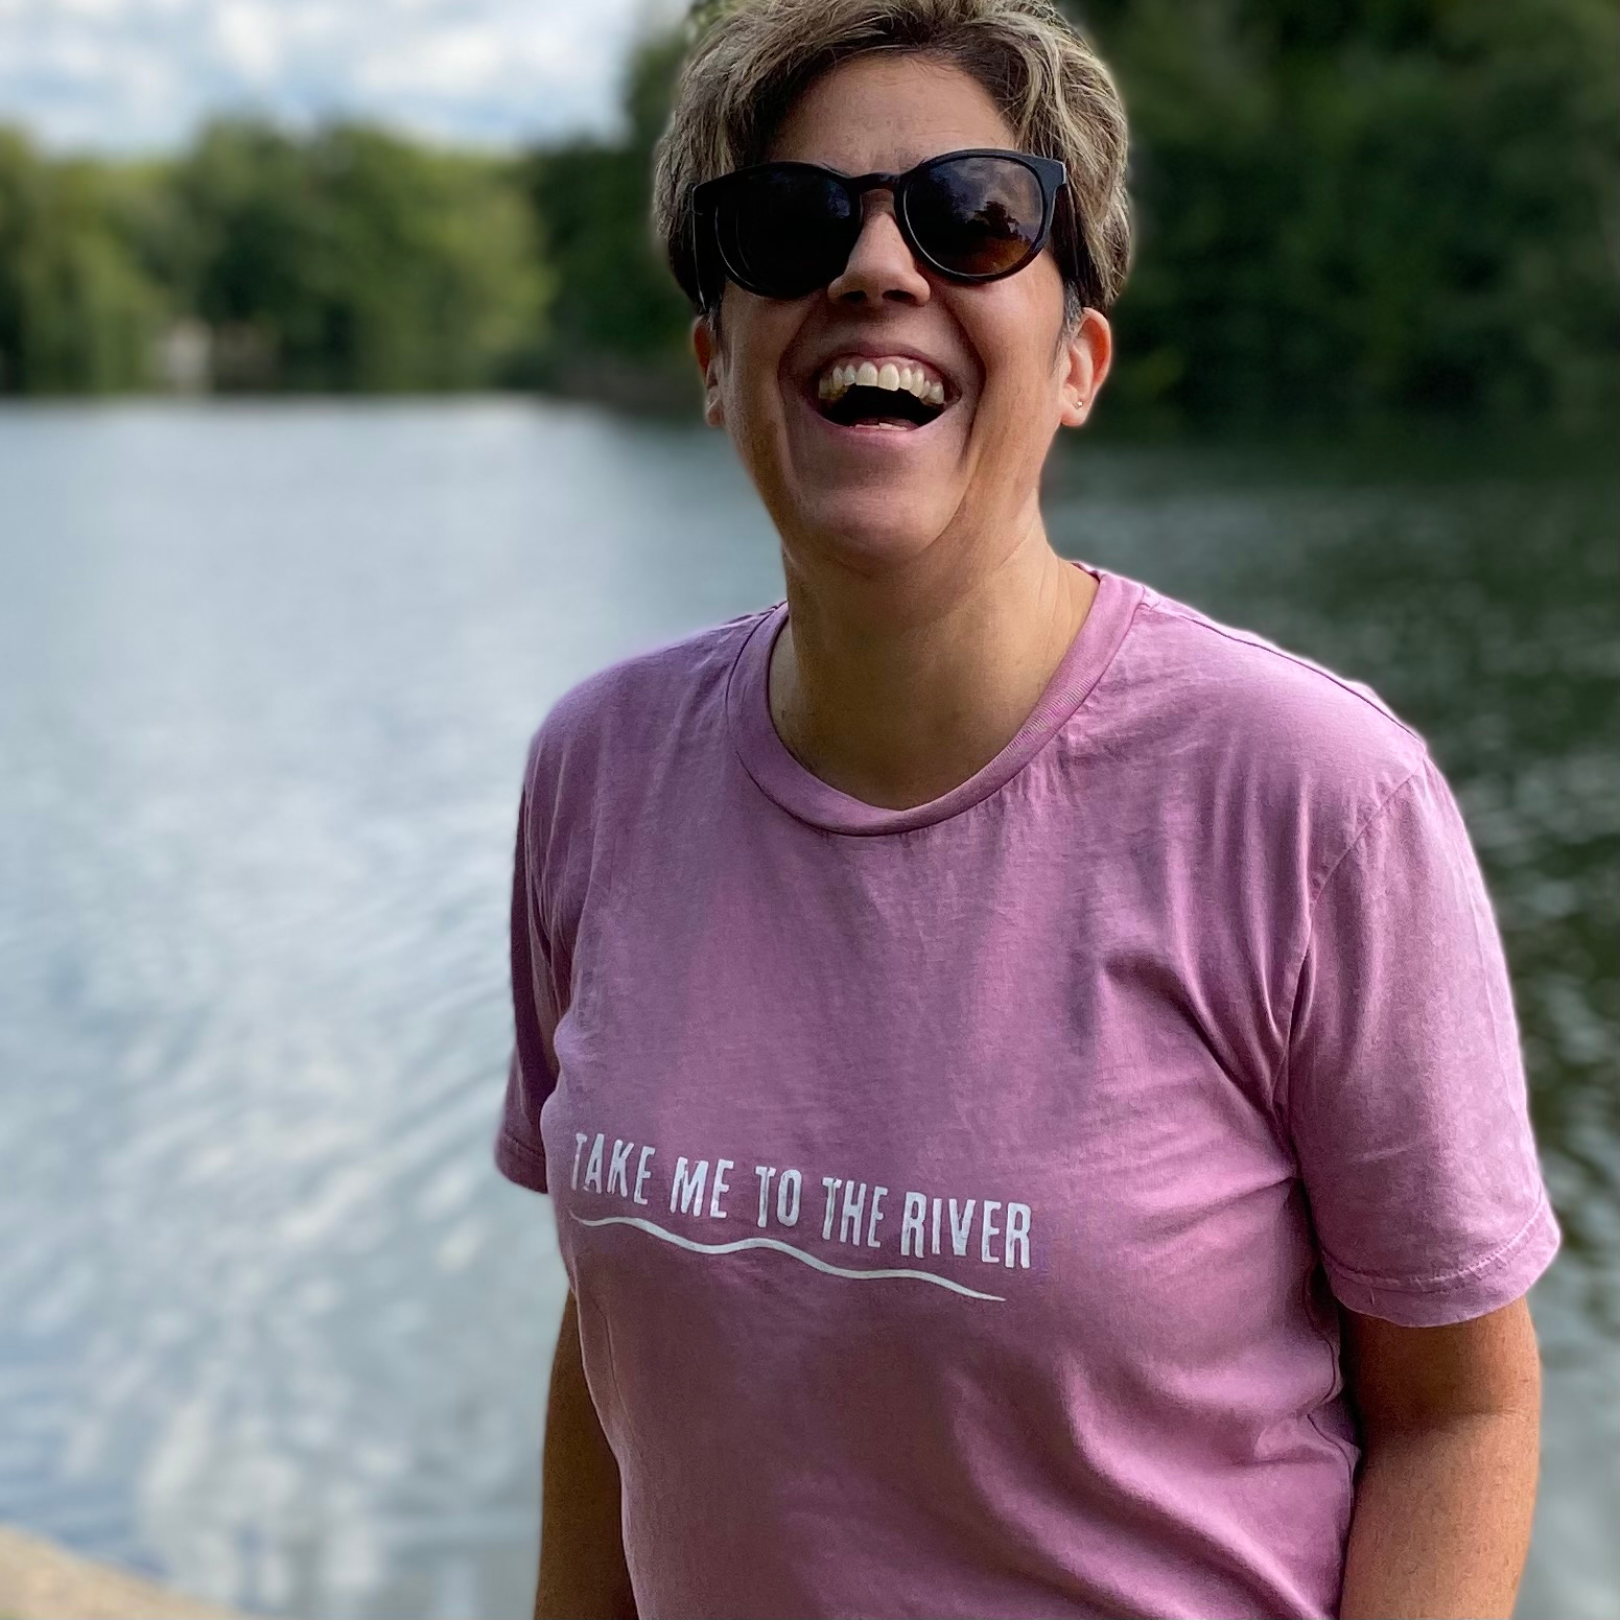 A woman laughing and wearing a pink t-shirt with 'Take me to the river' printed on the front.